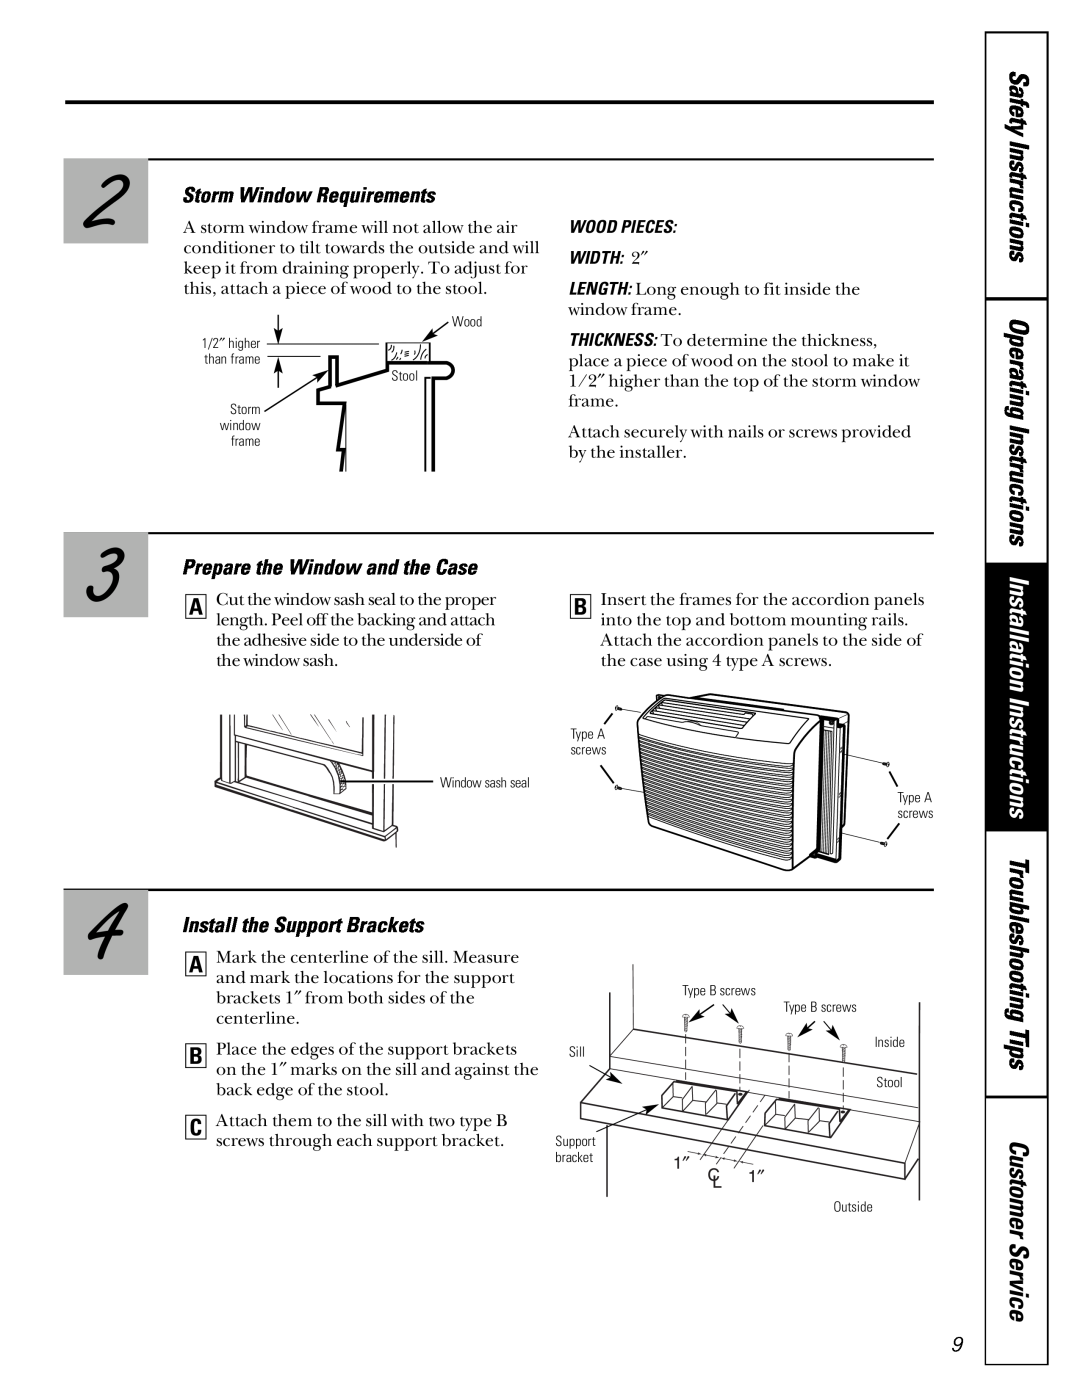 LG Electronics ASC05 Safety Instructions Operating Instructions, Storm Window Requirements, Install the Support Brackets 